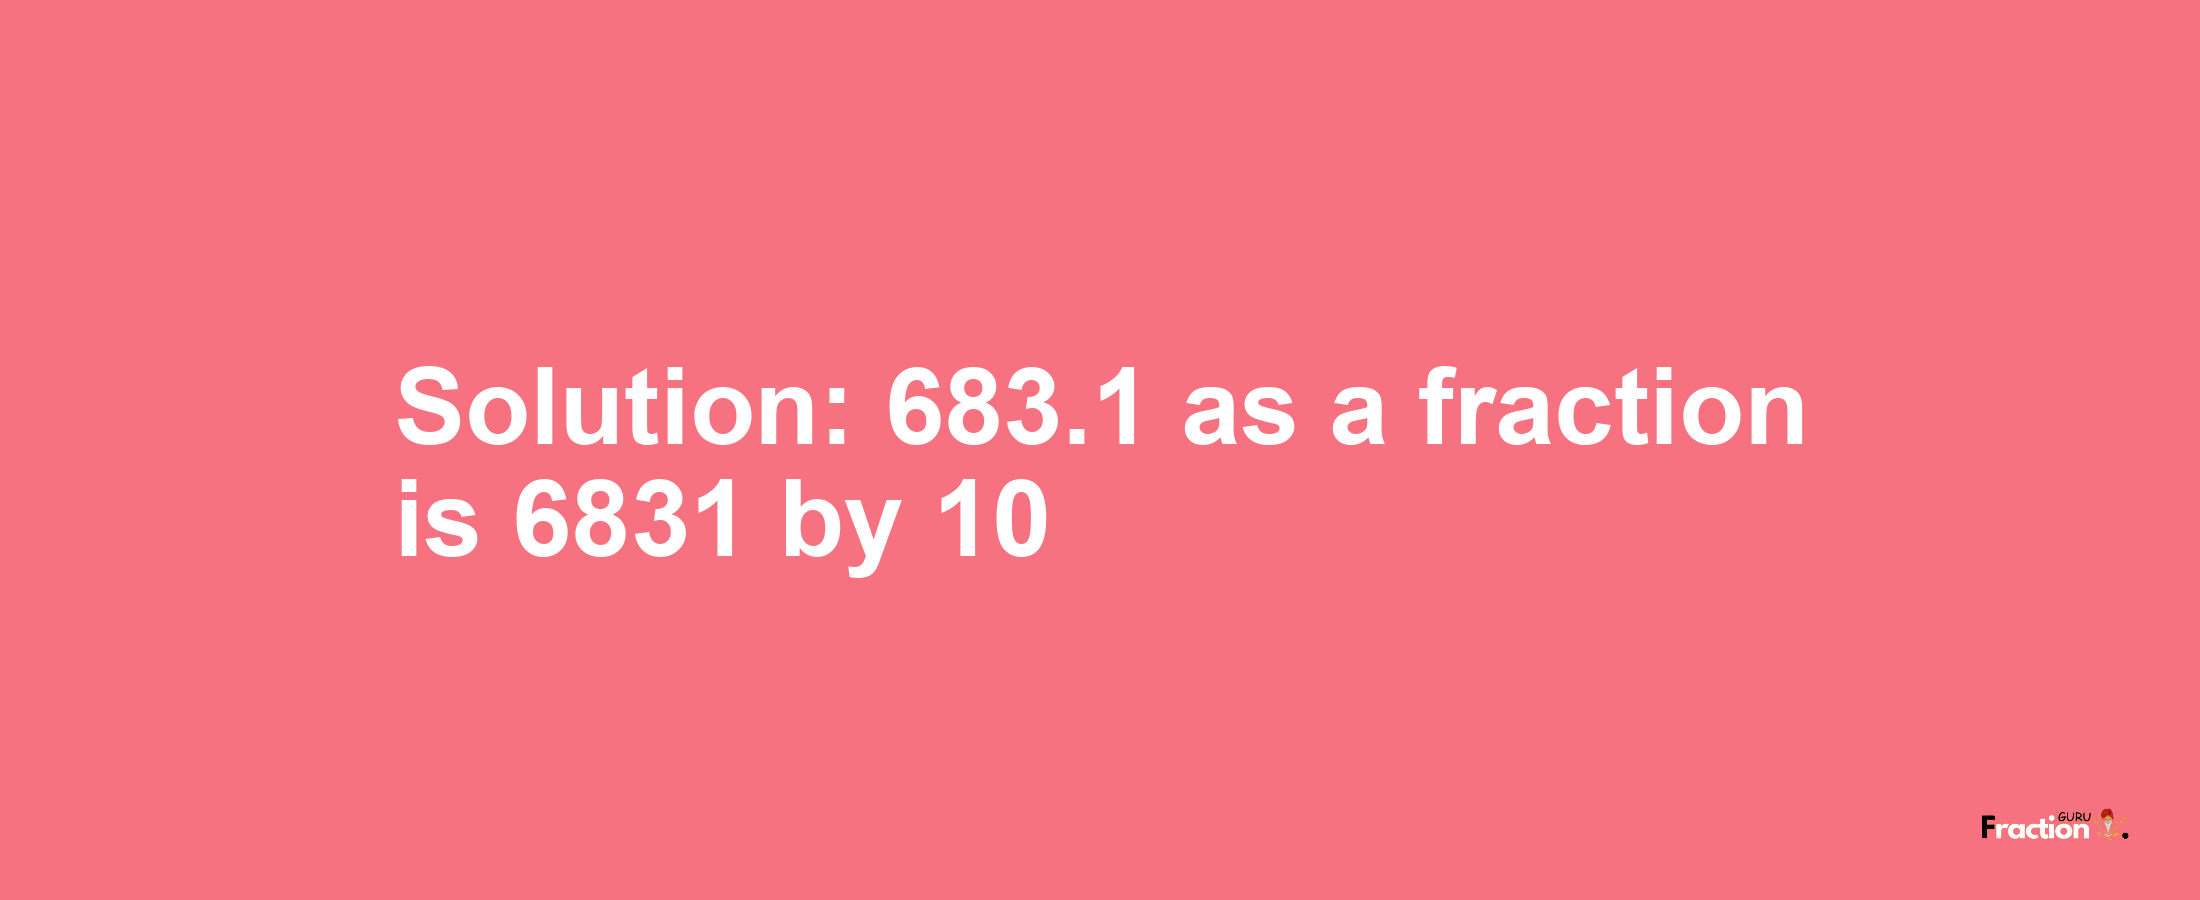 Solution:683.1 as a fraction is 6831/10